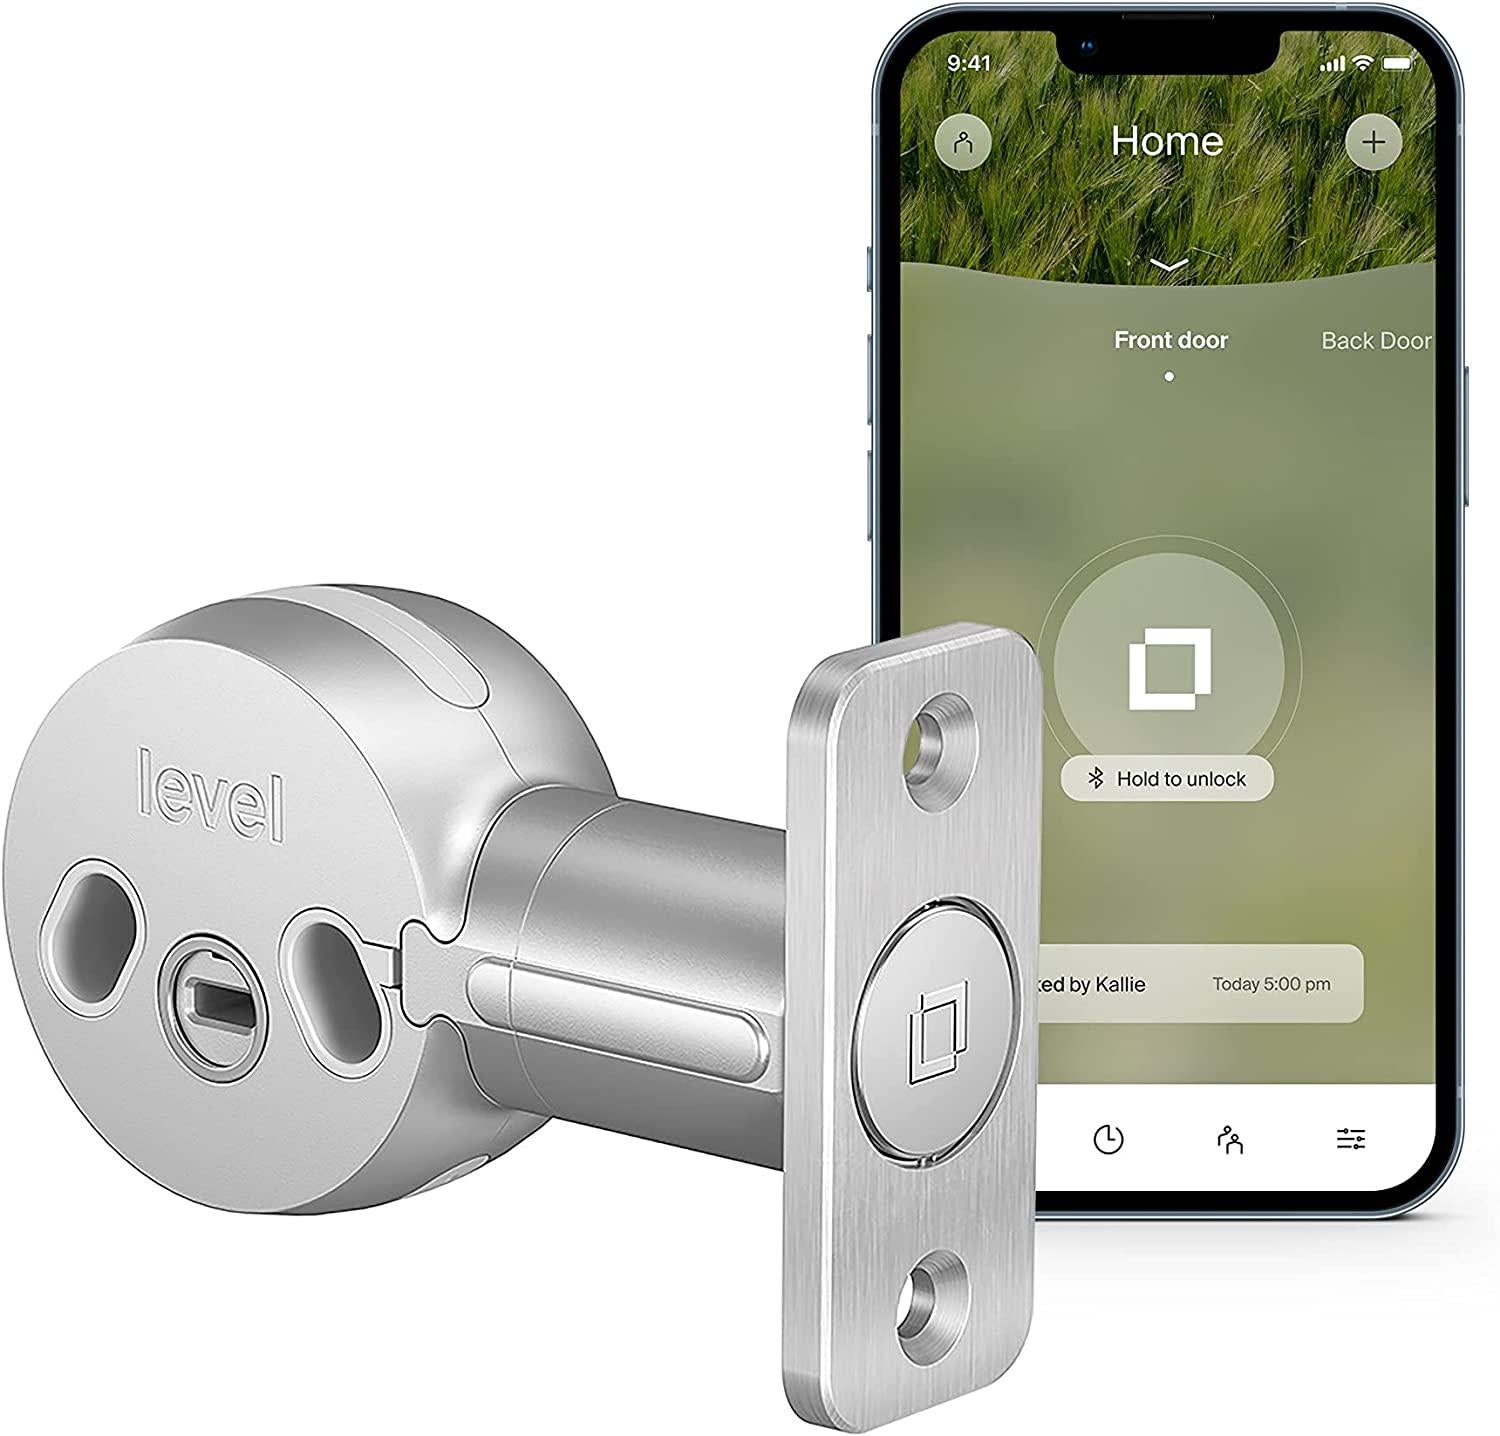 Level, Level Bolt, The Invisible Smart Lock. Bluetooth Deadbolt, Keyless Entry, Smartphone Access, Sharing, and Simple Installation